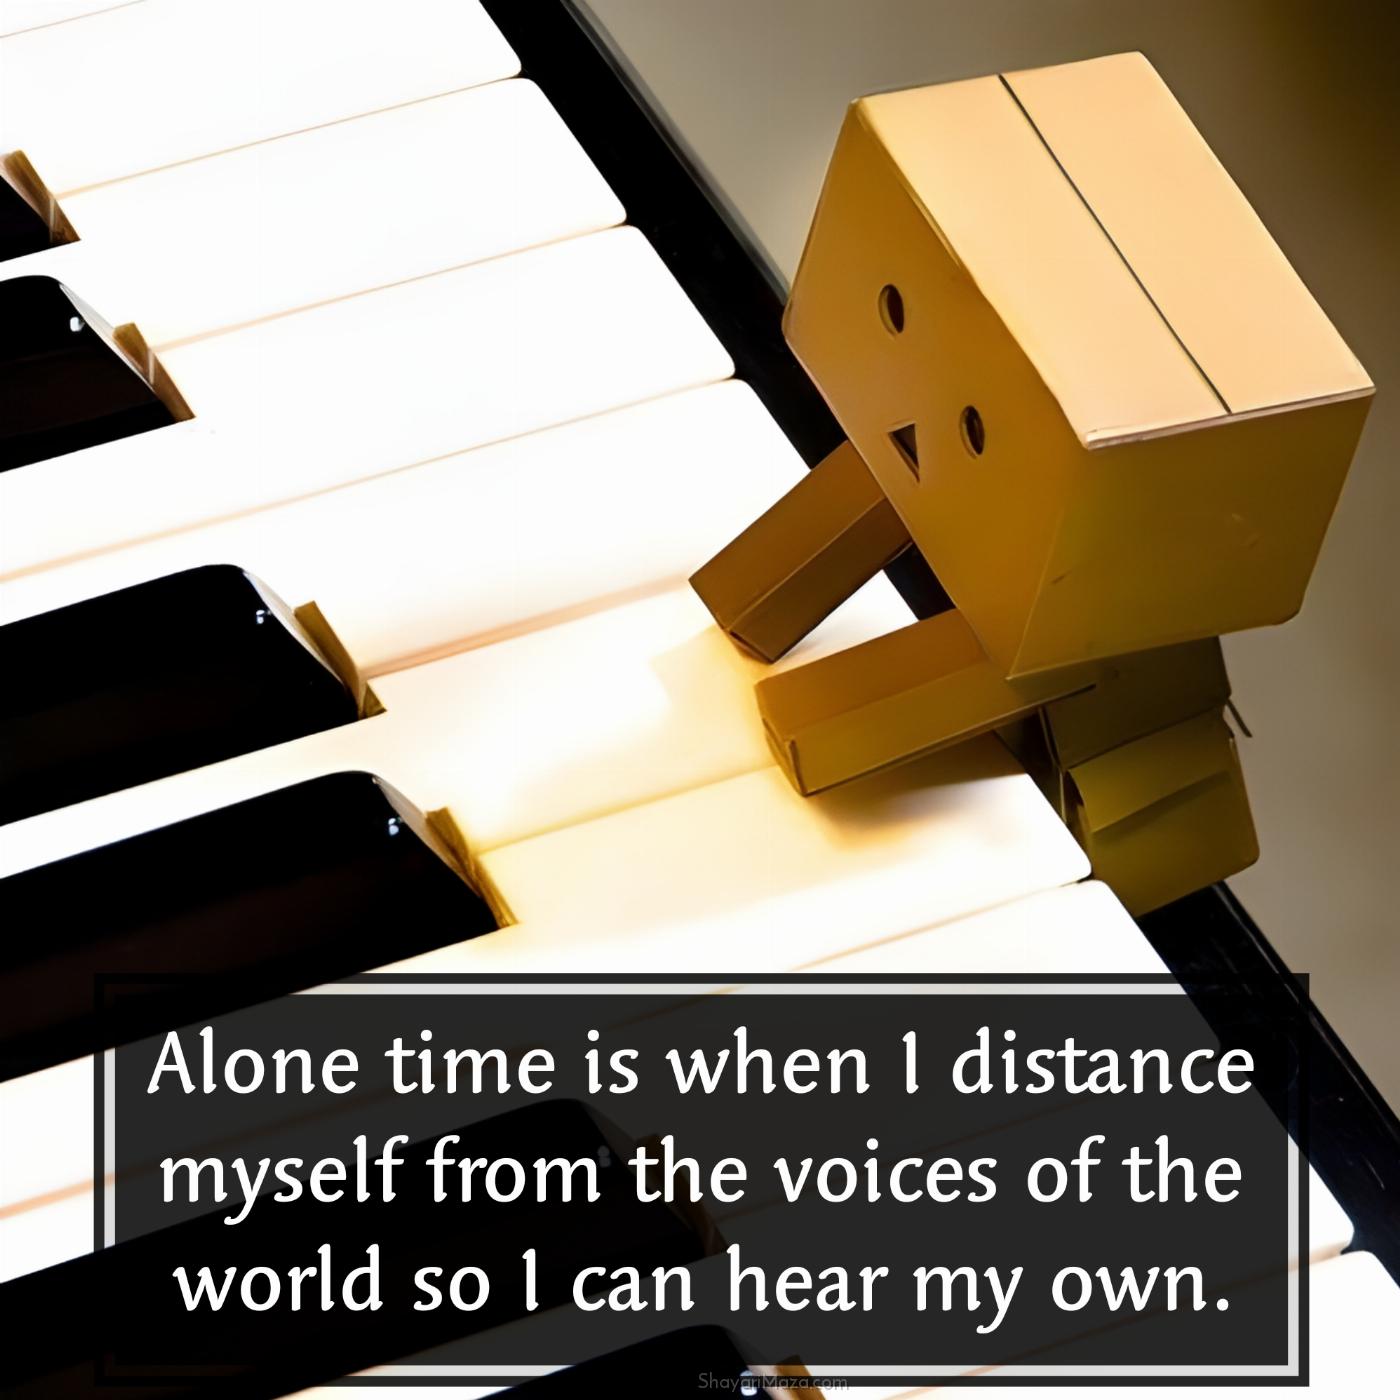 Alone time is when I distance myself from the voices of the world